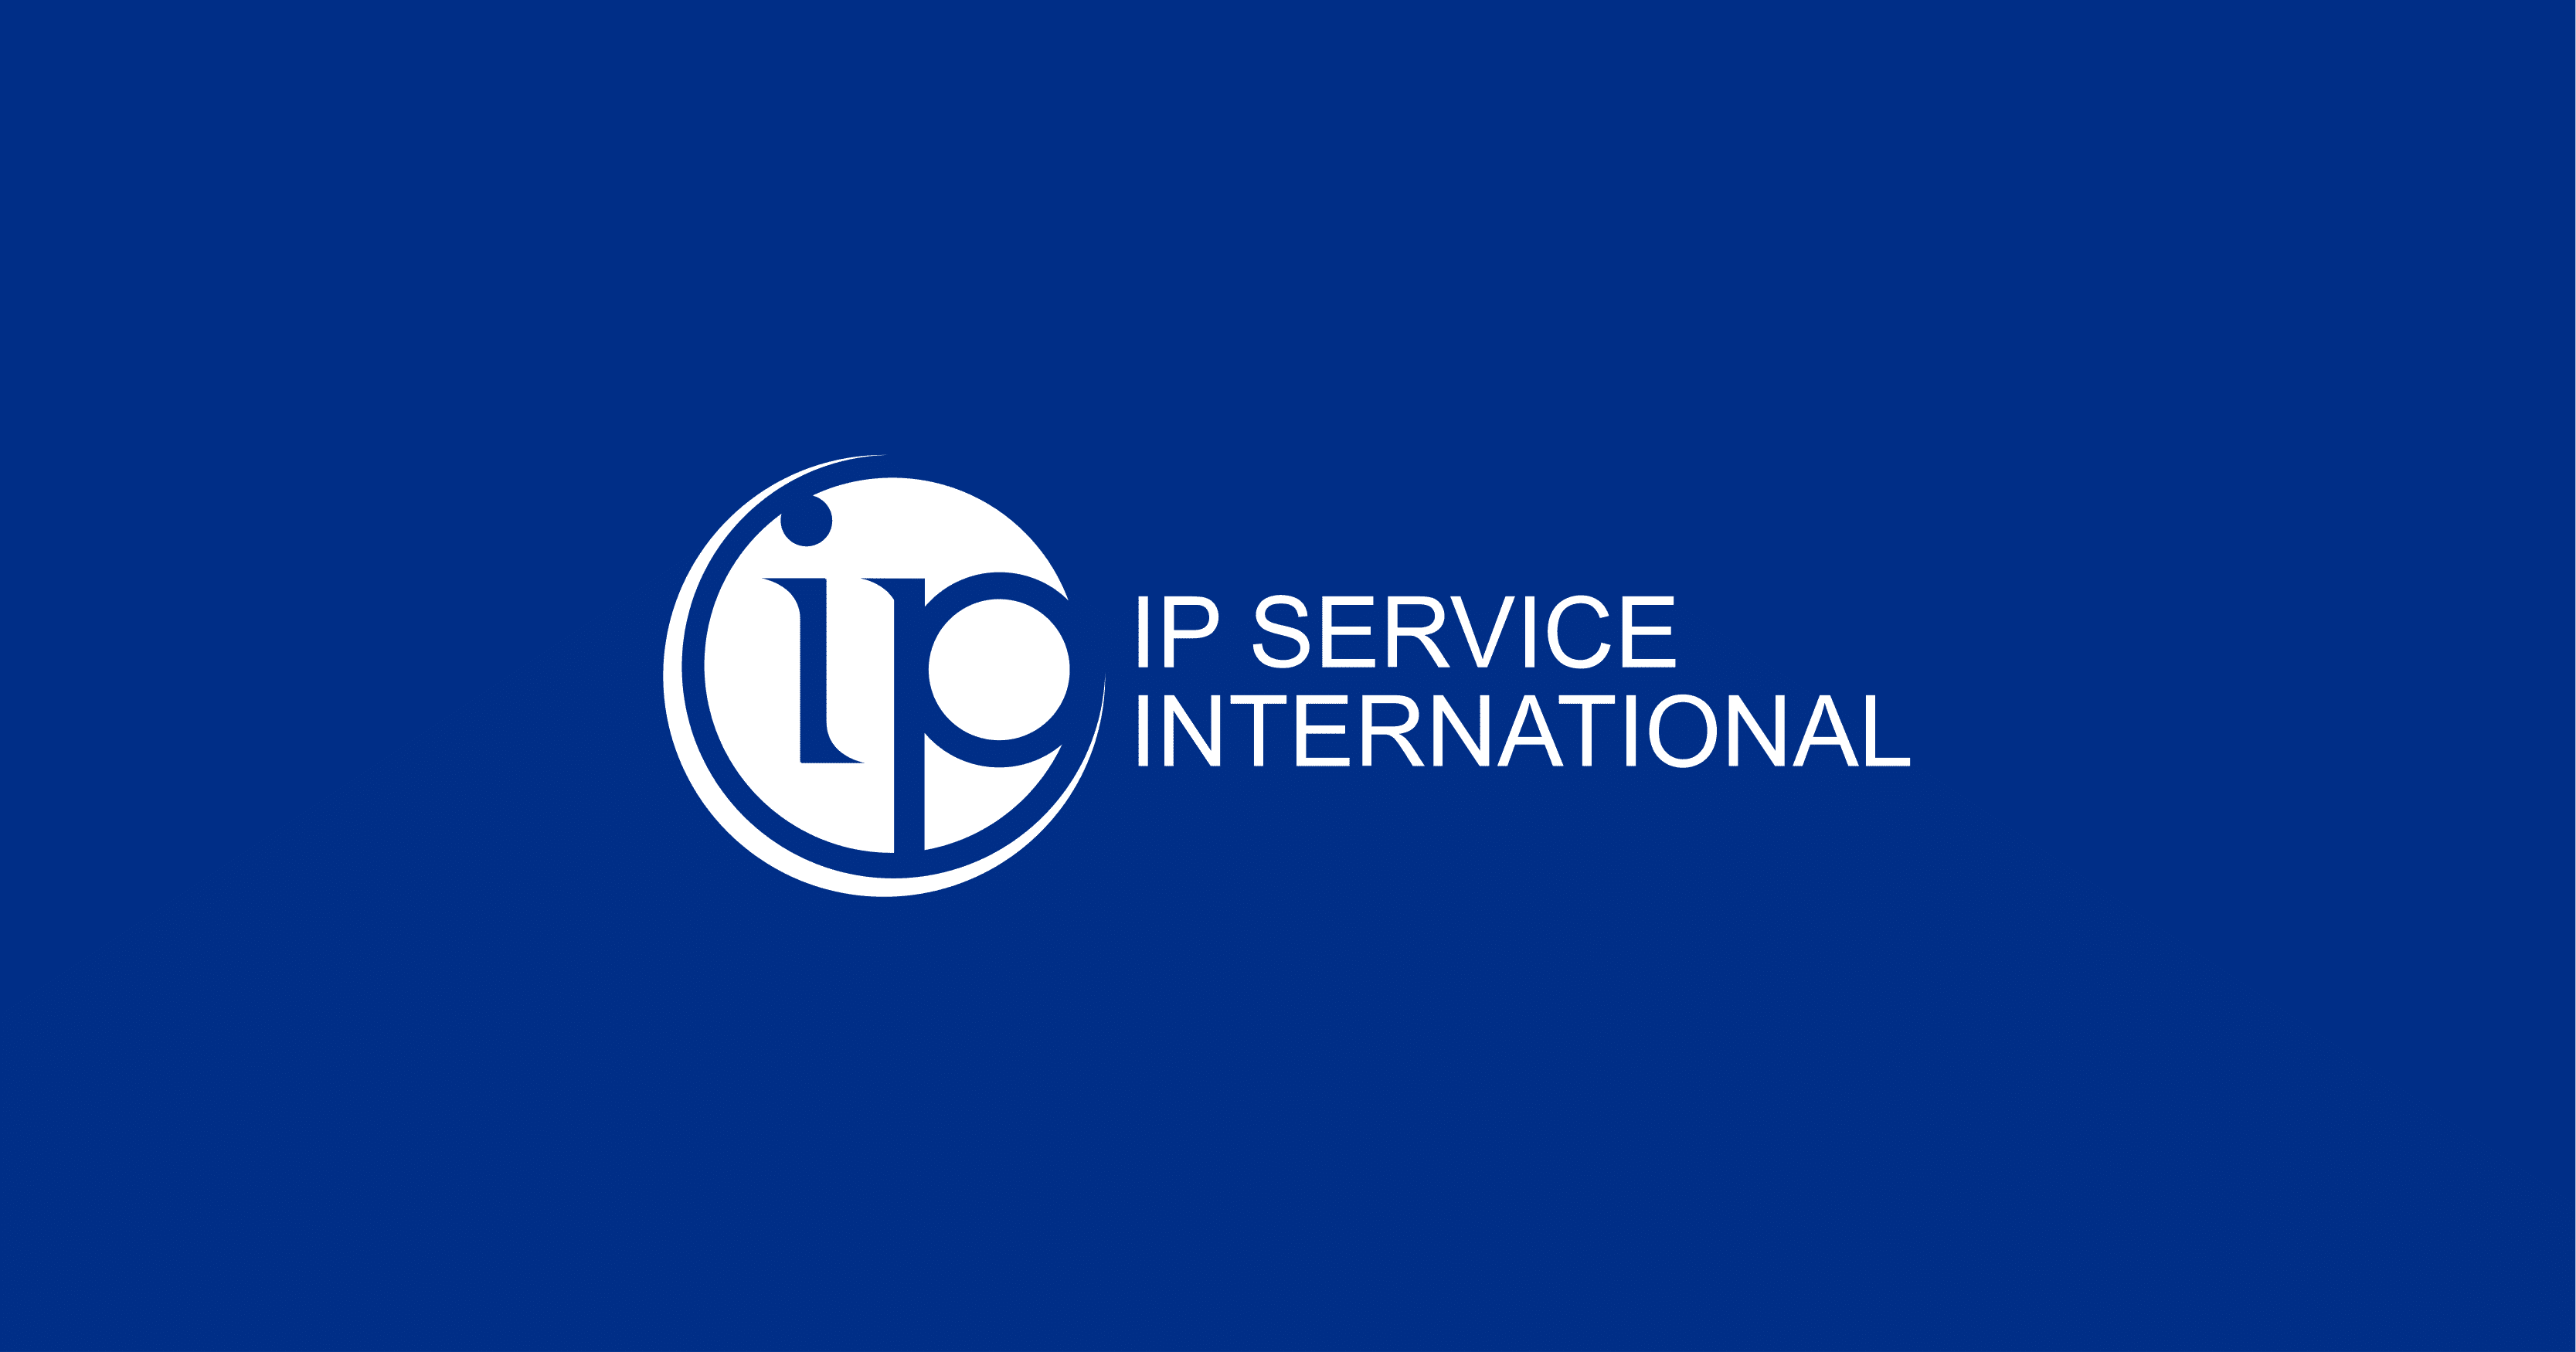 Product IP Services - IP SERVICE INTERNATIONAL image